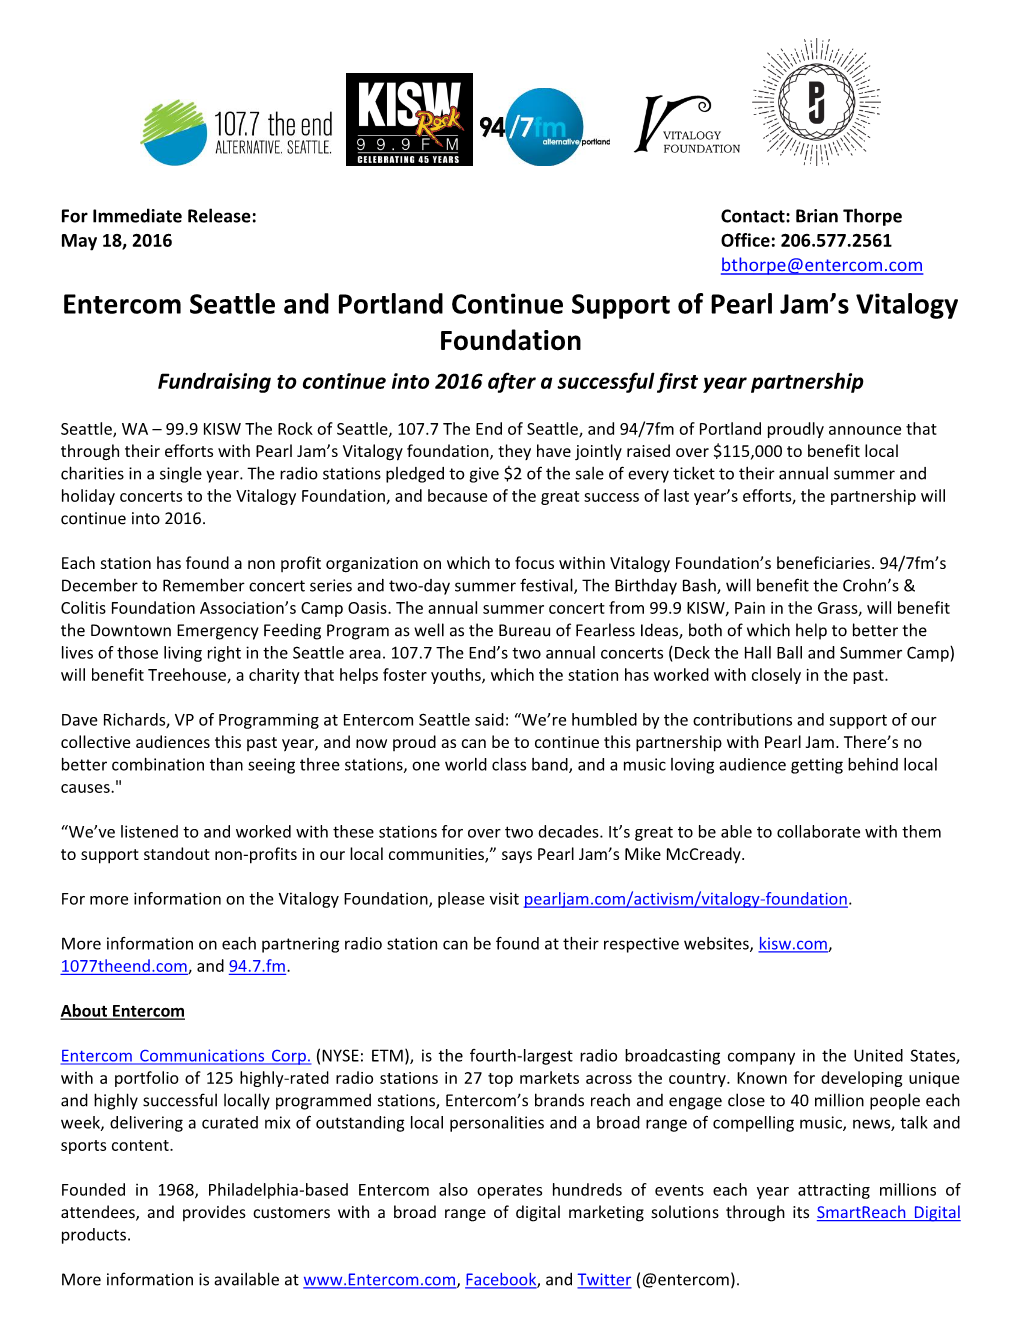 Entercom Seattle and Portland Continue Support of Pearl Jam's